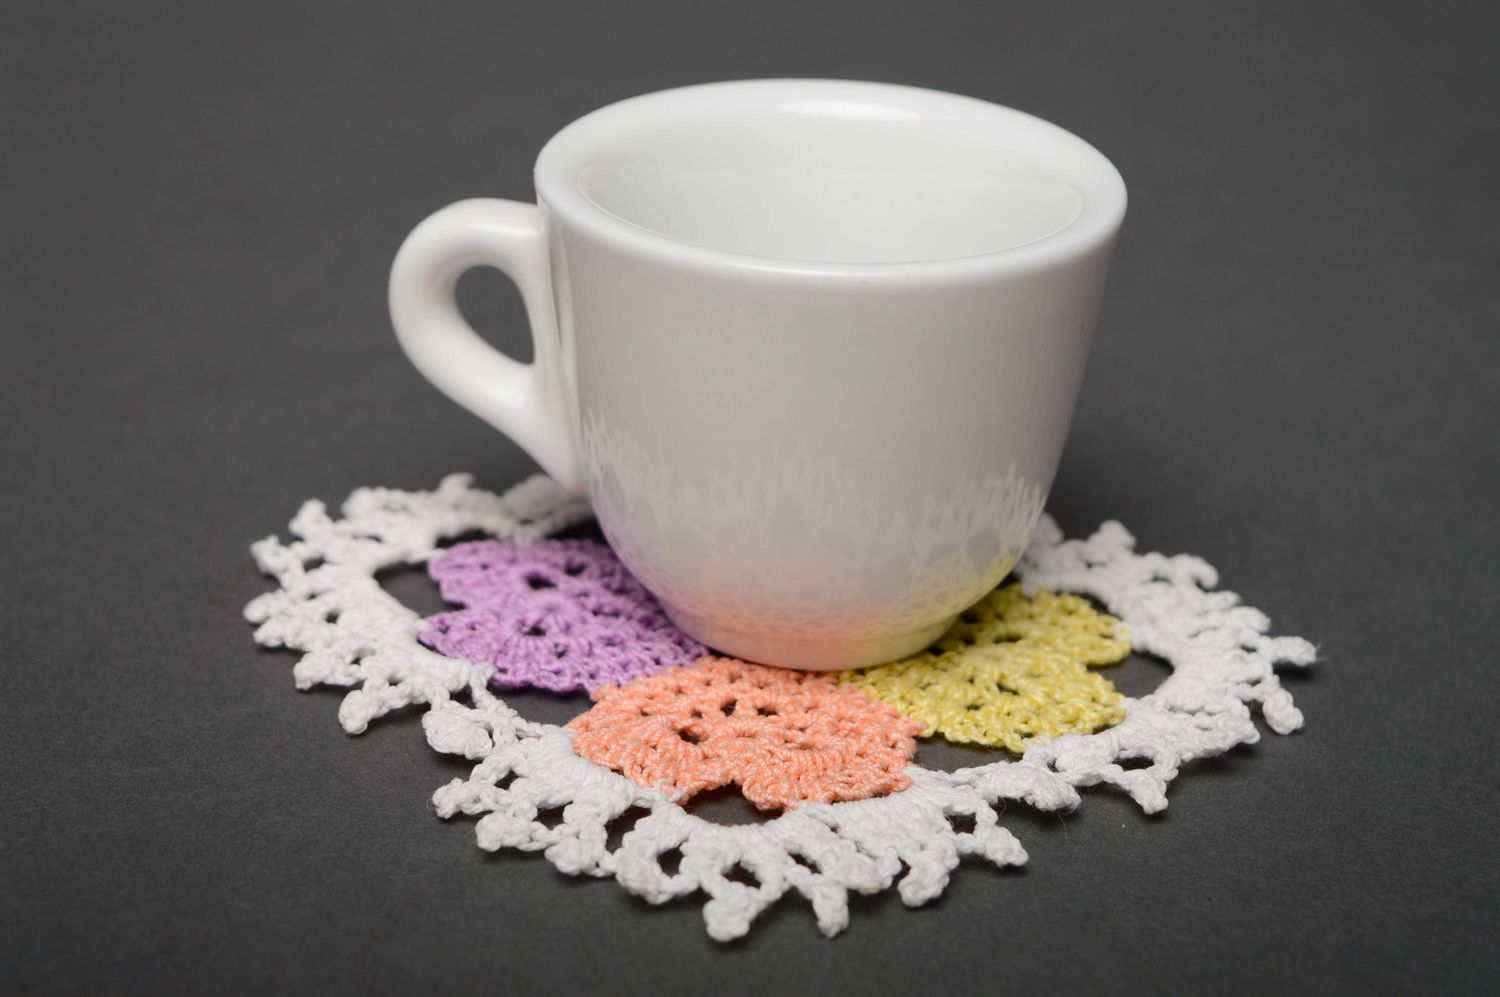 Crochet candy bowl and coasters photo 2